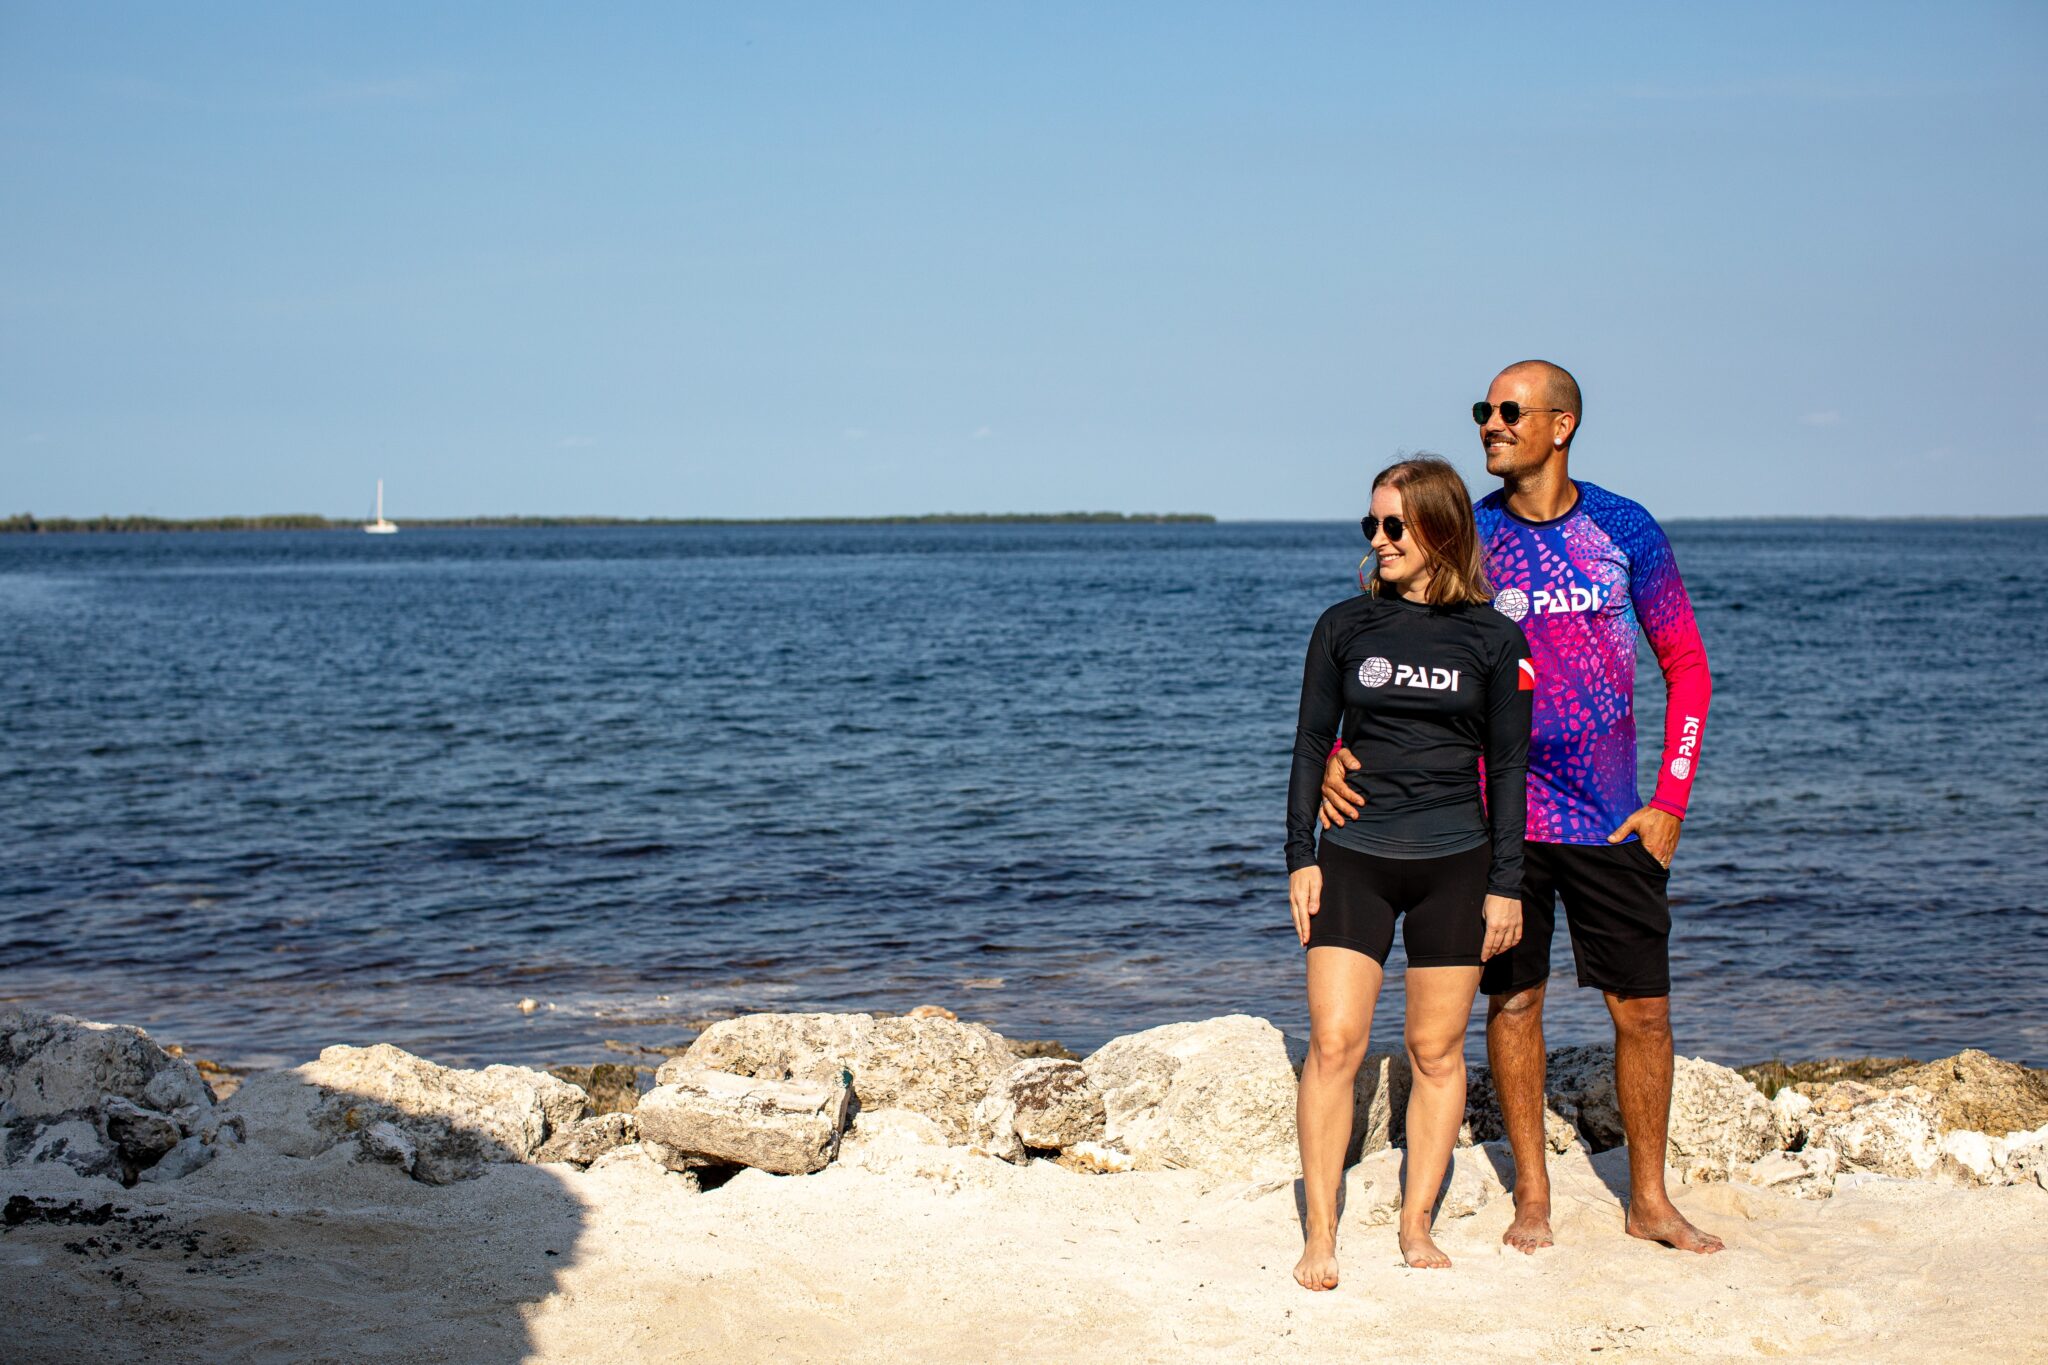 recycled plastic rash guards two people on beach most popular padi gear